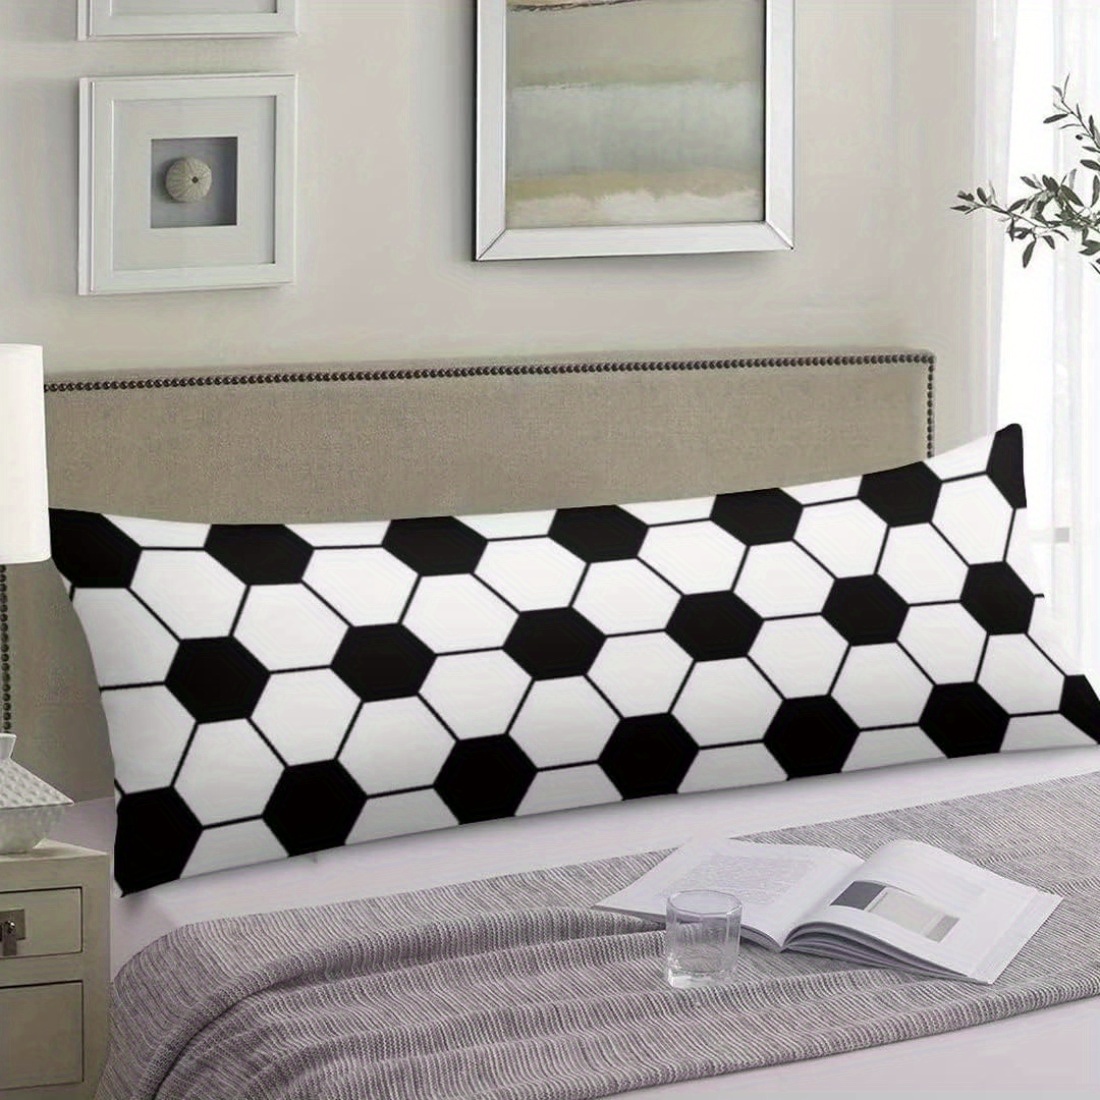 

1pc, Soccer Theme Body Pillow Cover Sports Soccer Ball Black And White Abstract Geometric Cushion Long Pillowcase With Zipper Decorative Bedding Pillow Soft Cases Pillow Covers 20"x54